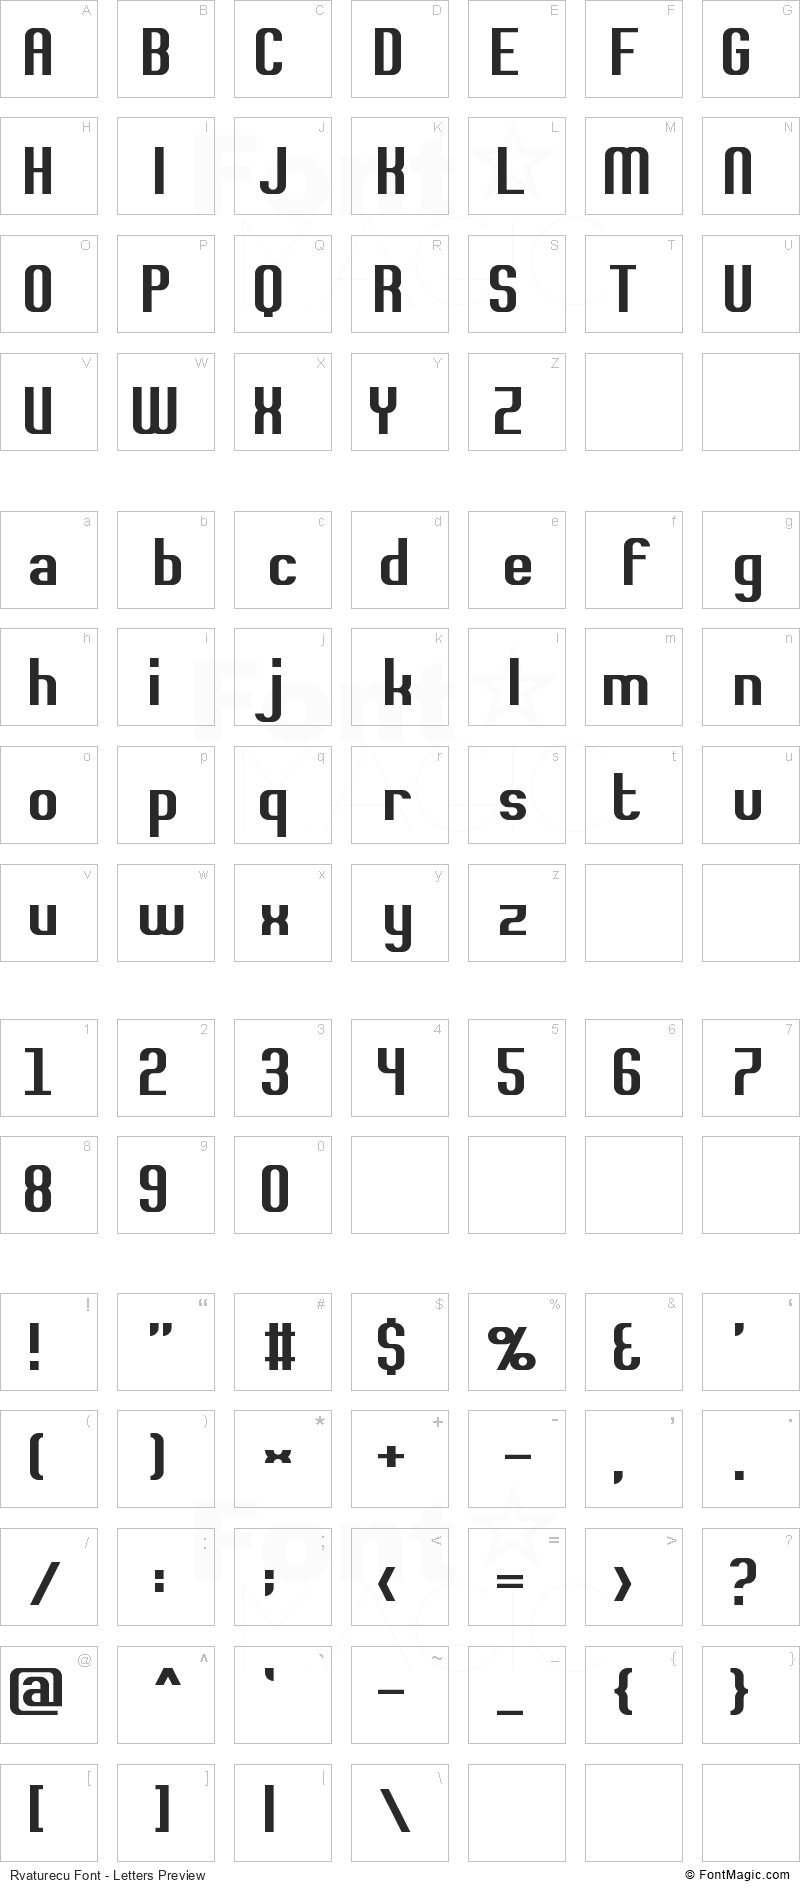 Rvaturecu Font - All Latters Preview Chart